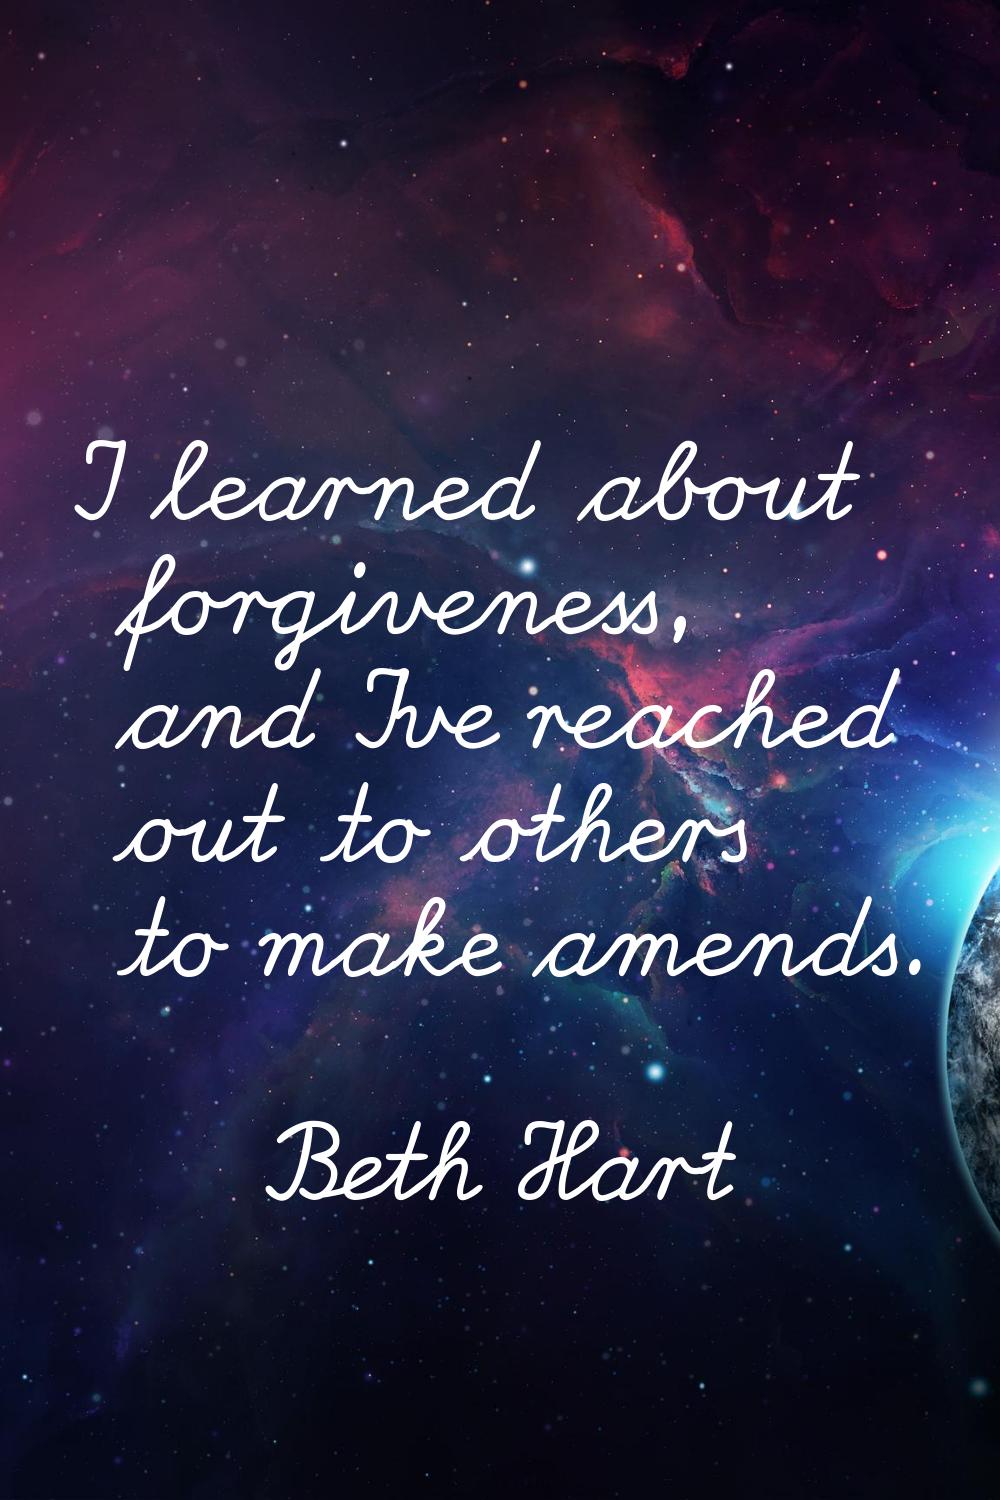 I learned about forgiveness, and I've reached out to others to make amends.